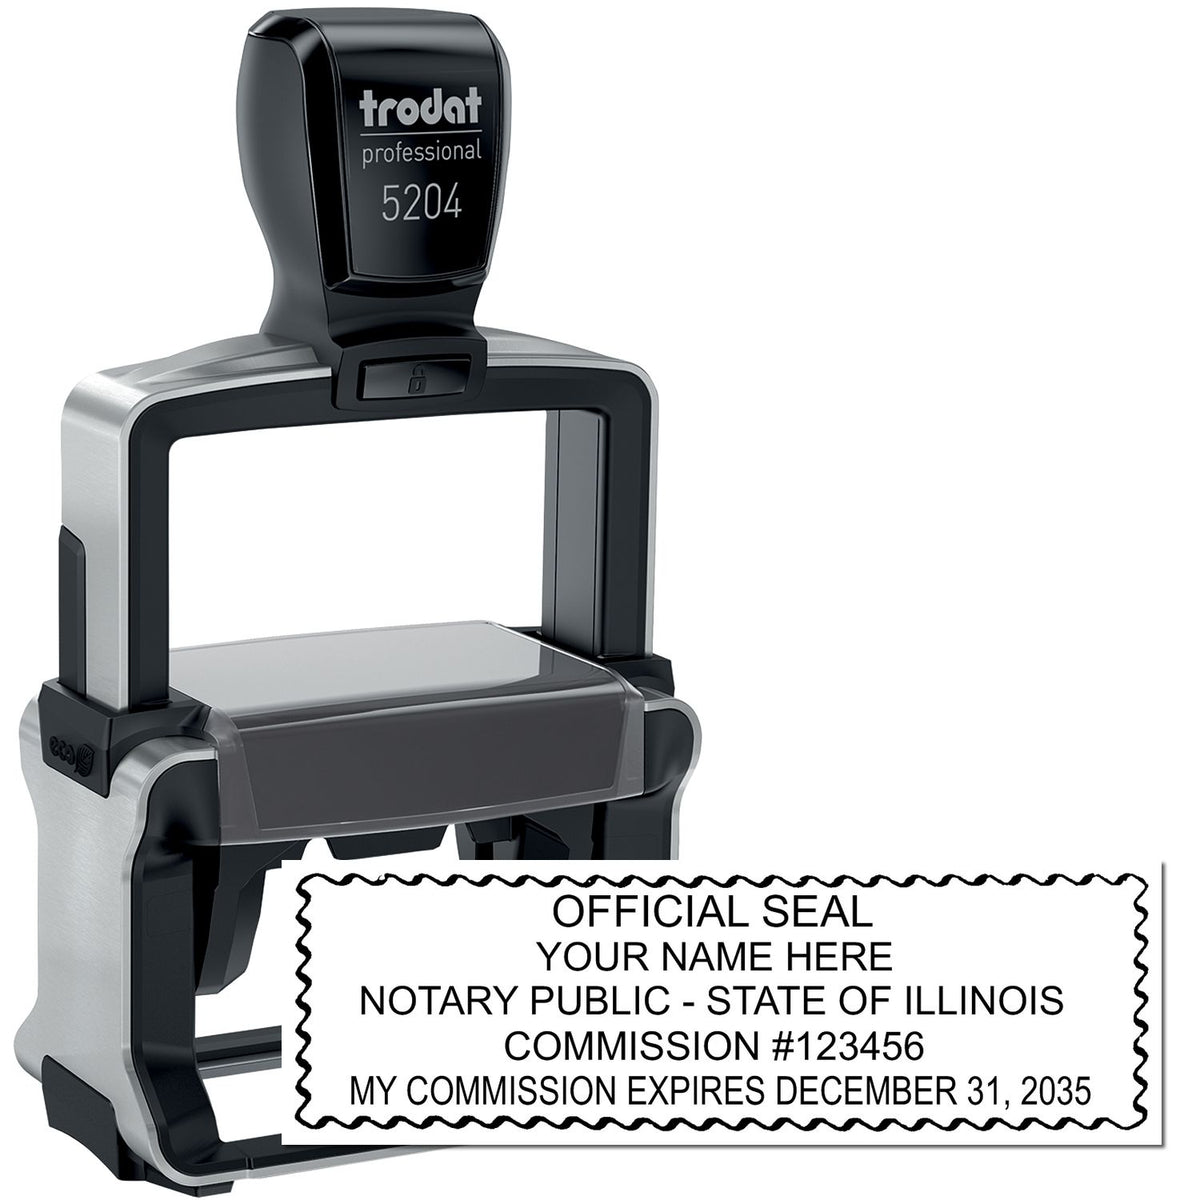 The main image for the Heavy-Duty Illinois Rectangular Notary Stamp depicting a sample of the imprint and electronic files